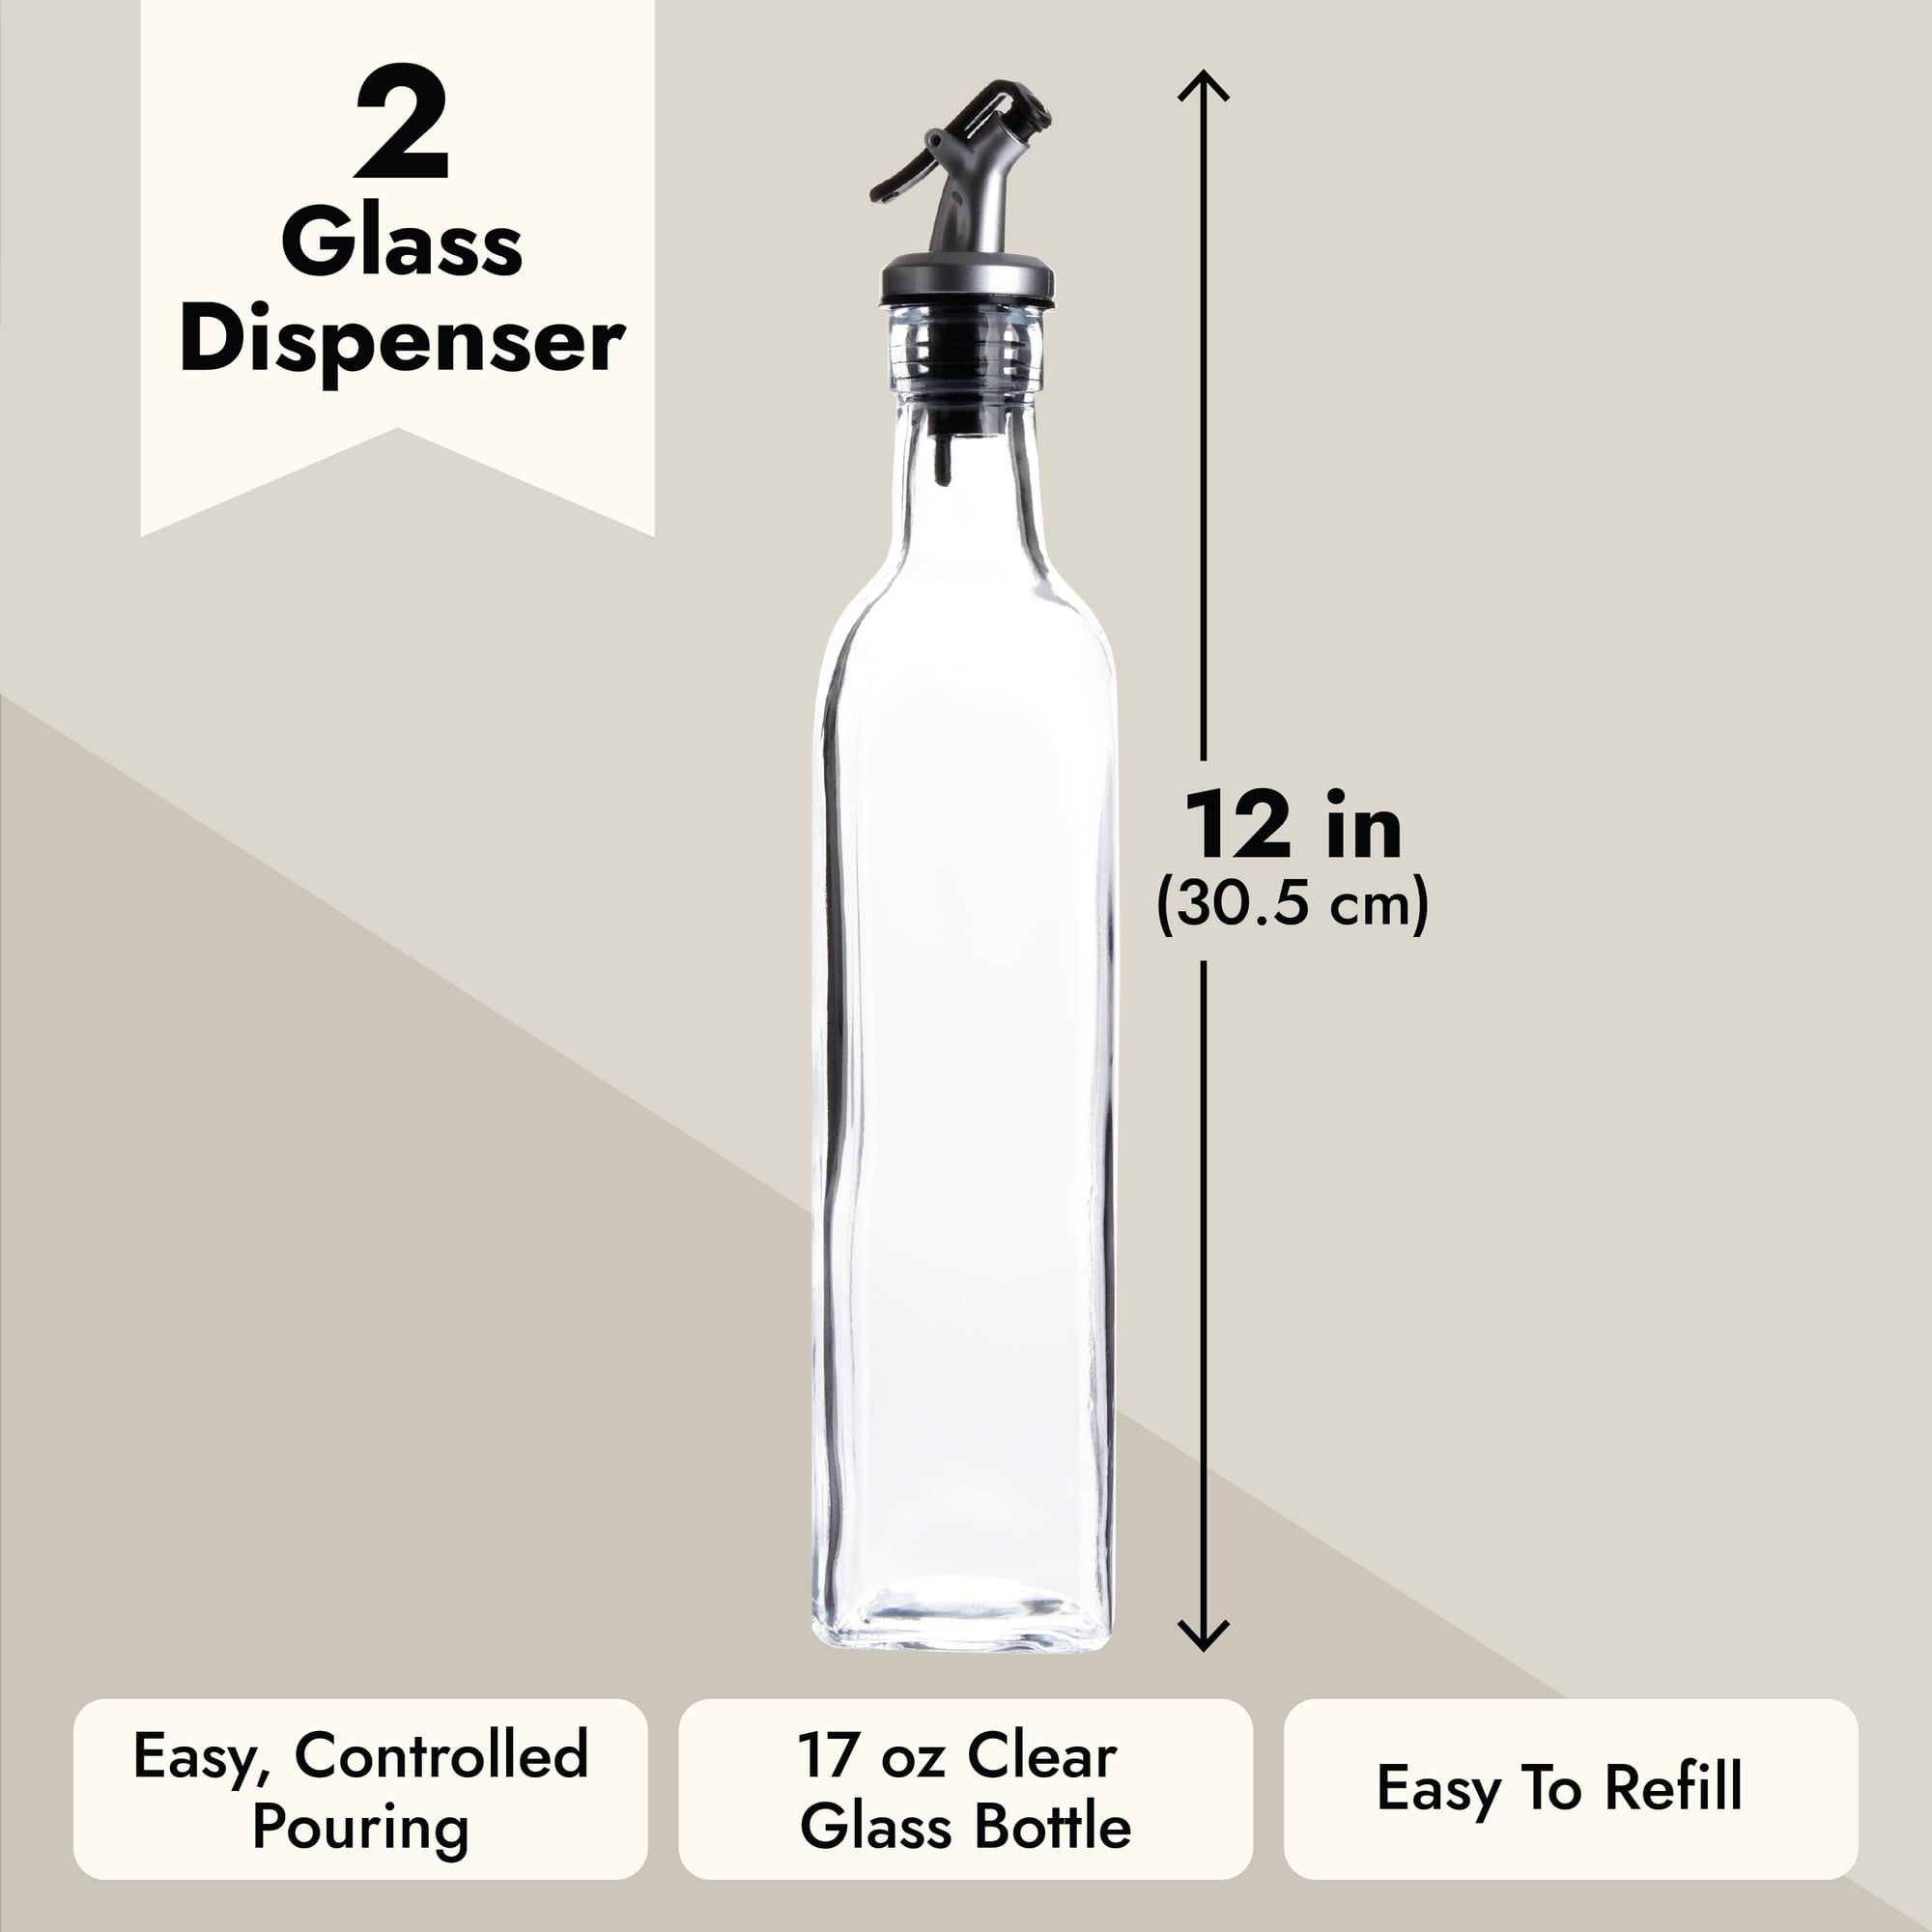 Showvigor Olive Oil Dispenser, Vinegar and Olive Oil Bottle Dispenser 500  ml/17 oz, Oil Bottles for Kitchen with 1 Pourers,2 Labels and 1 Funnel,  Home